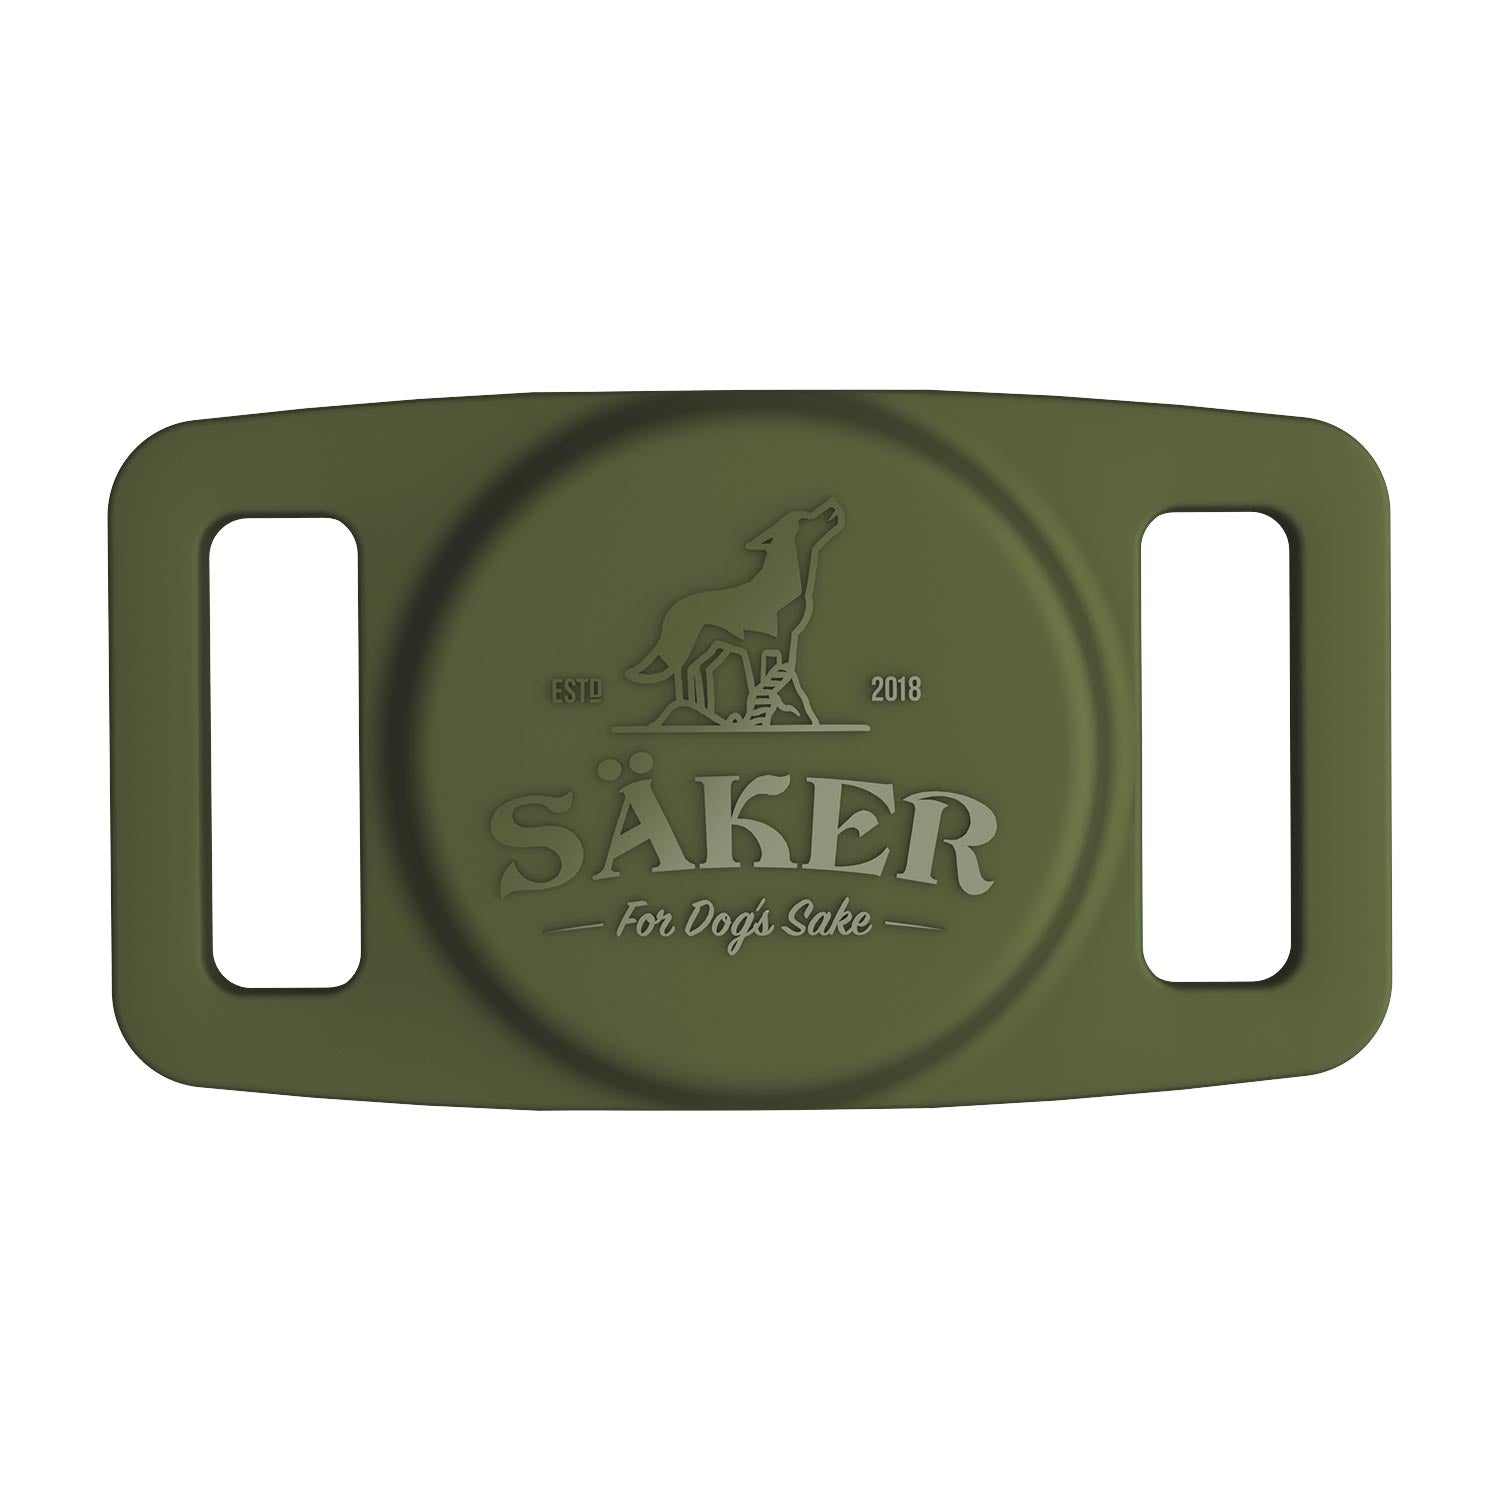 Main image of the Mammoth Airtag Holder in Moss Green